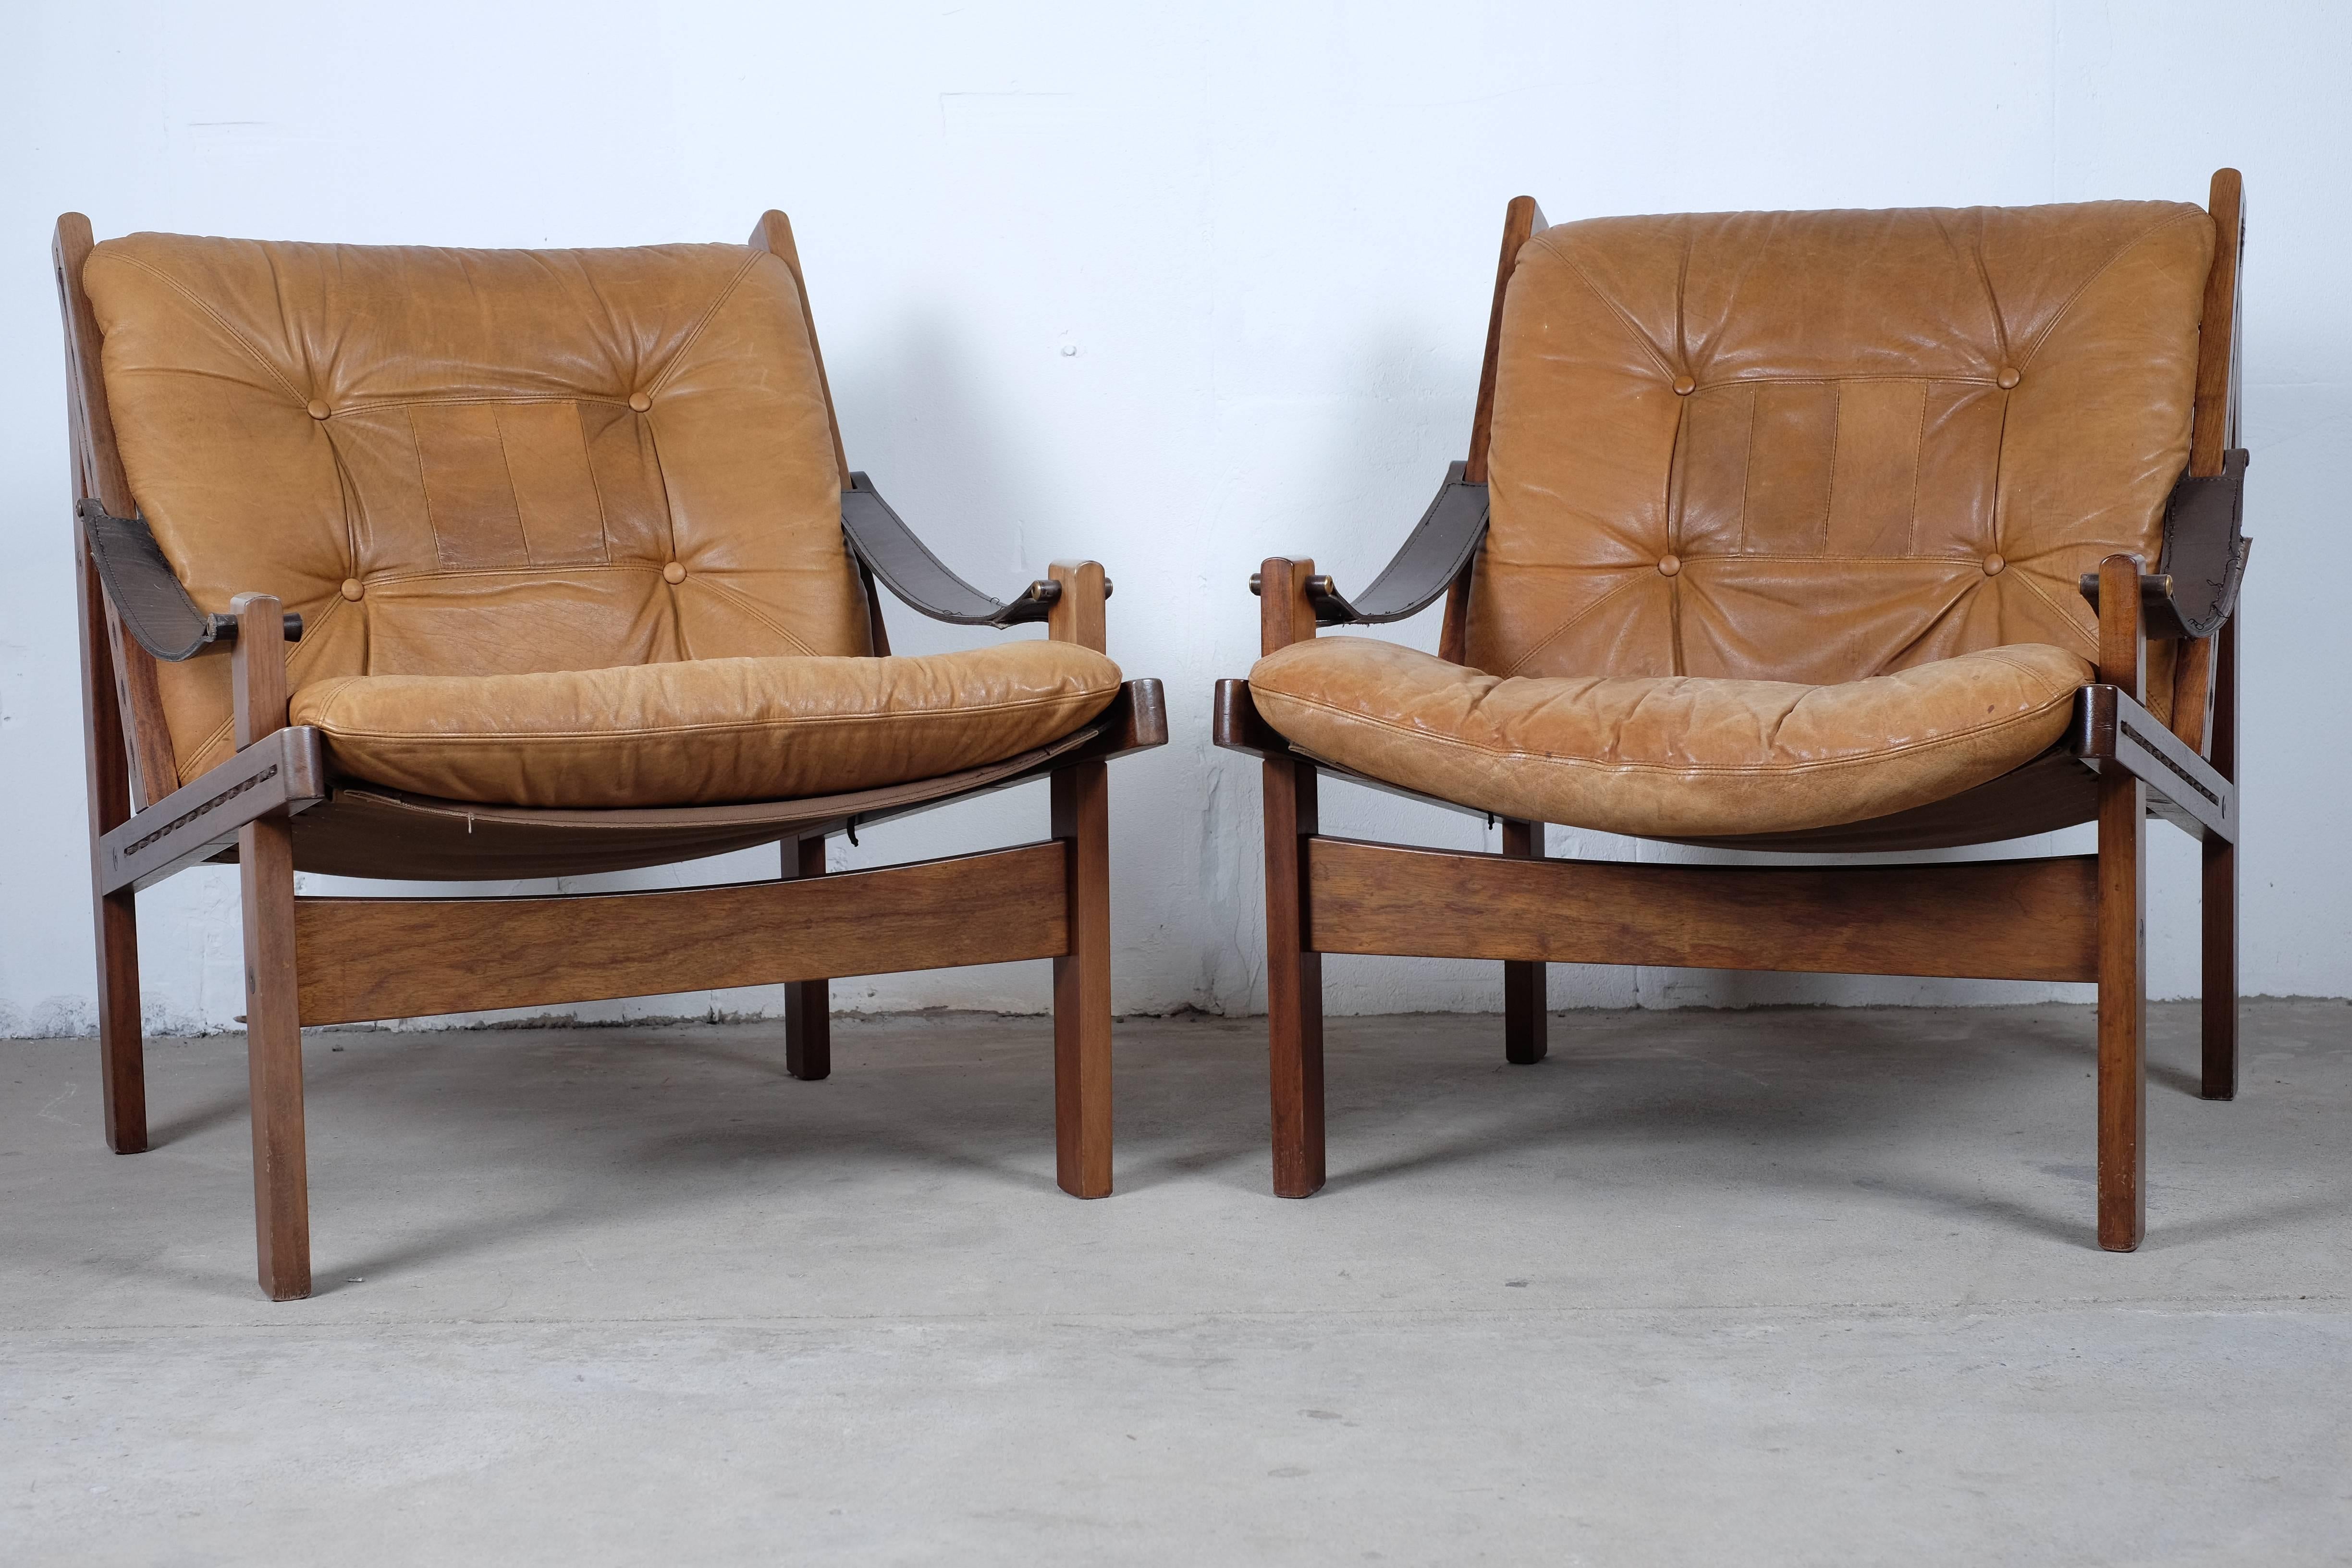 A matching set of three easy chairs two low back and one with high back, brown leather Hunter chairs designed by Torbjørn Afdal and manufactured by Bruksbo, Norway.

These Hunter chairs are constructed from stained solid oak frames. 
The frames